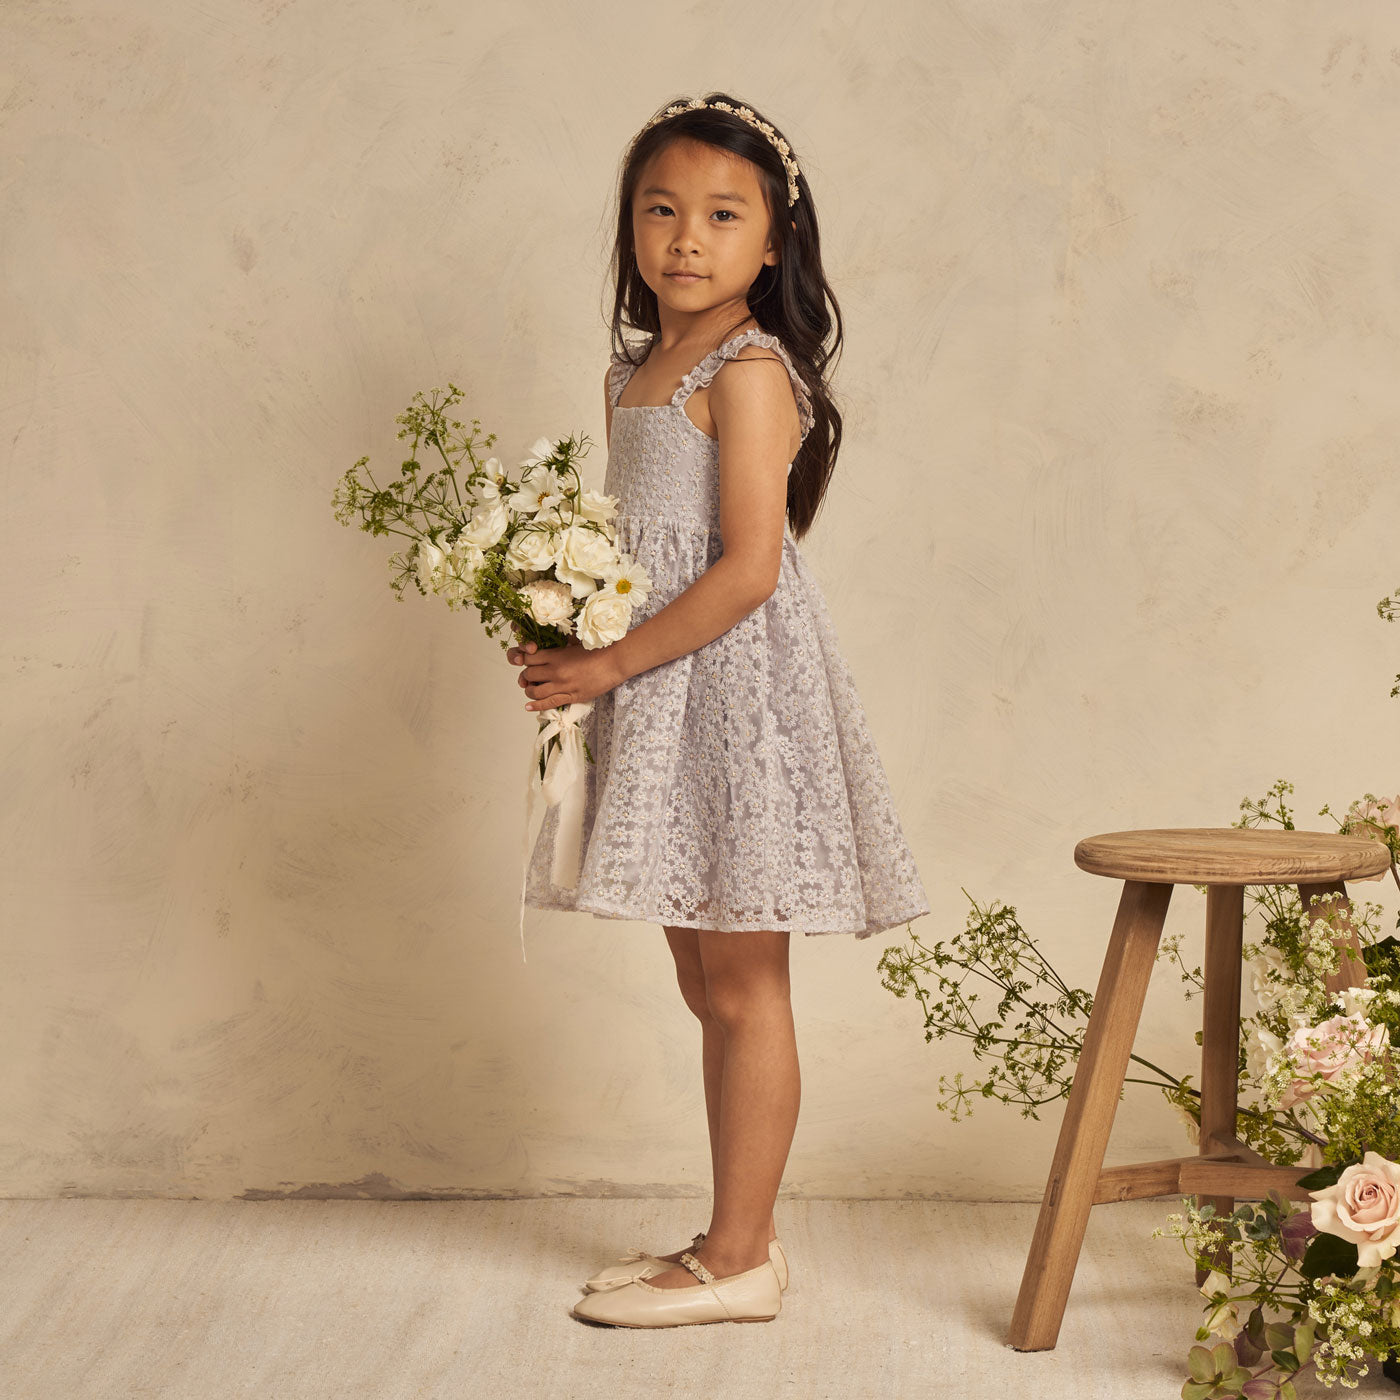 Girl holds flowers while wearing Noralee Mara Dress - Cloud Daisy Tulle